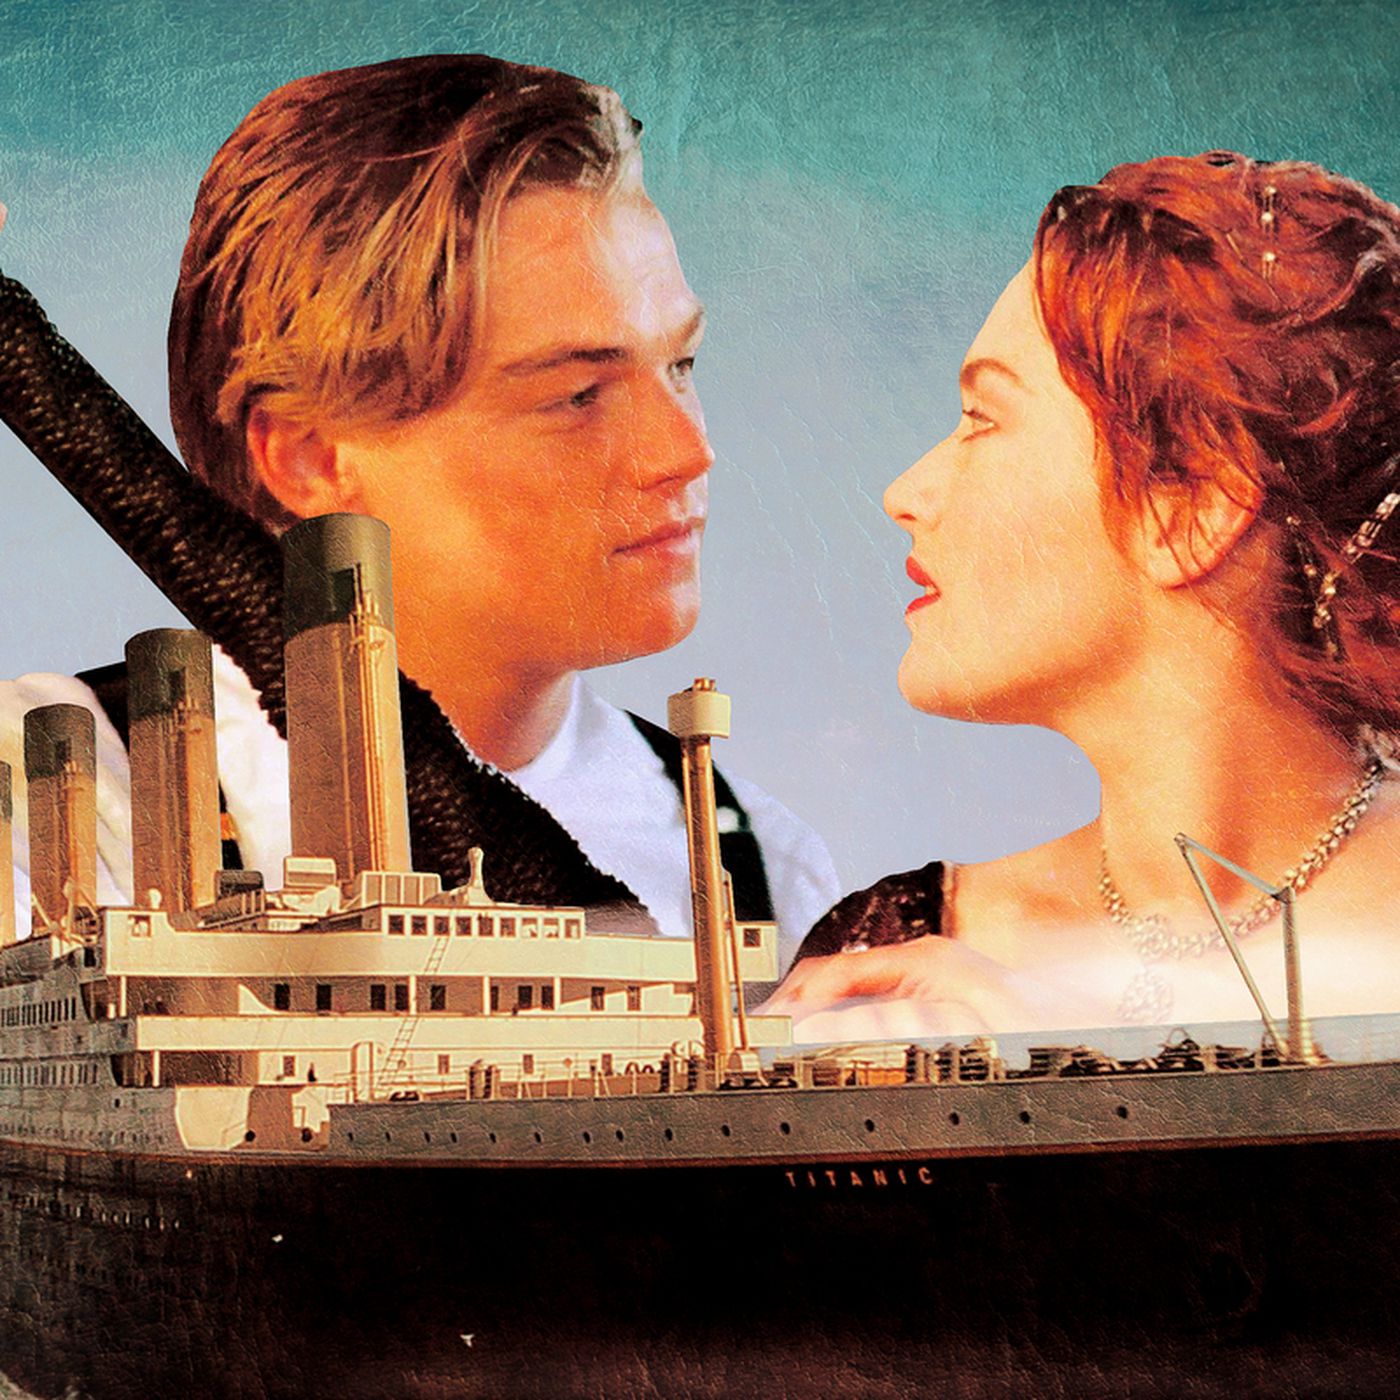 Titanic': Power Ranking the 25 Best Things About James Cameron's Film